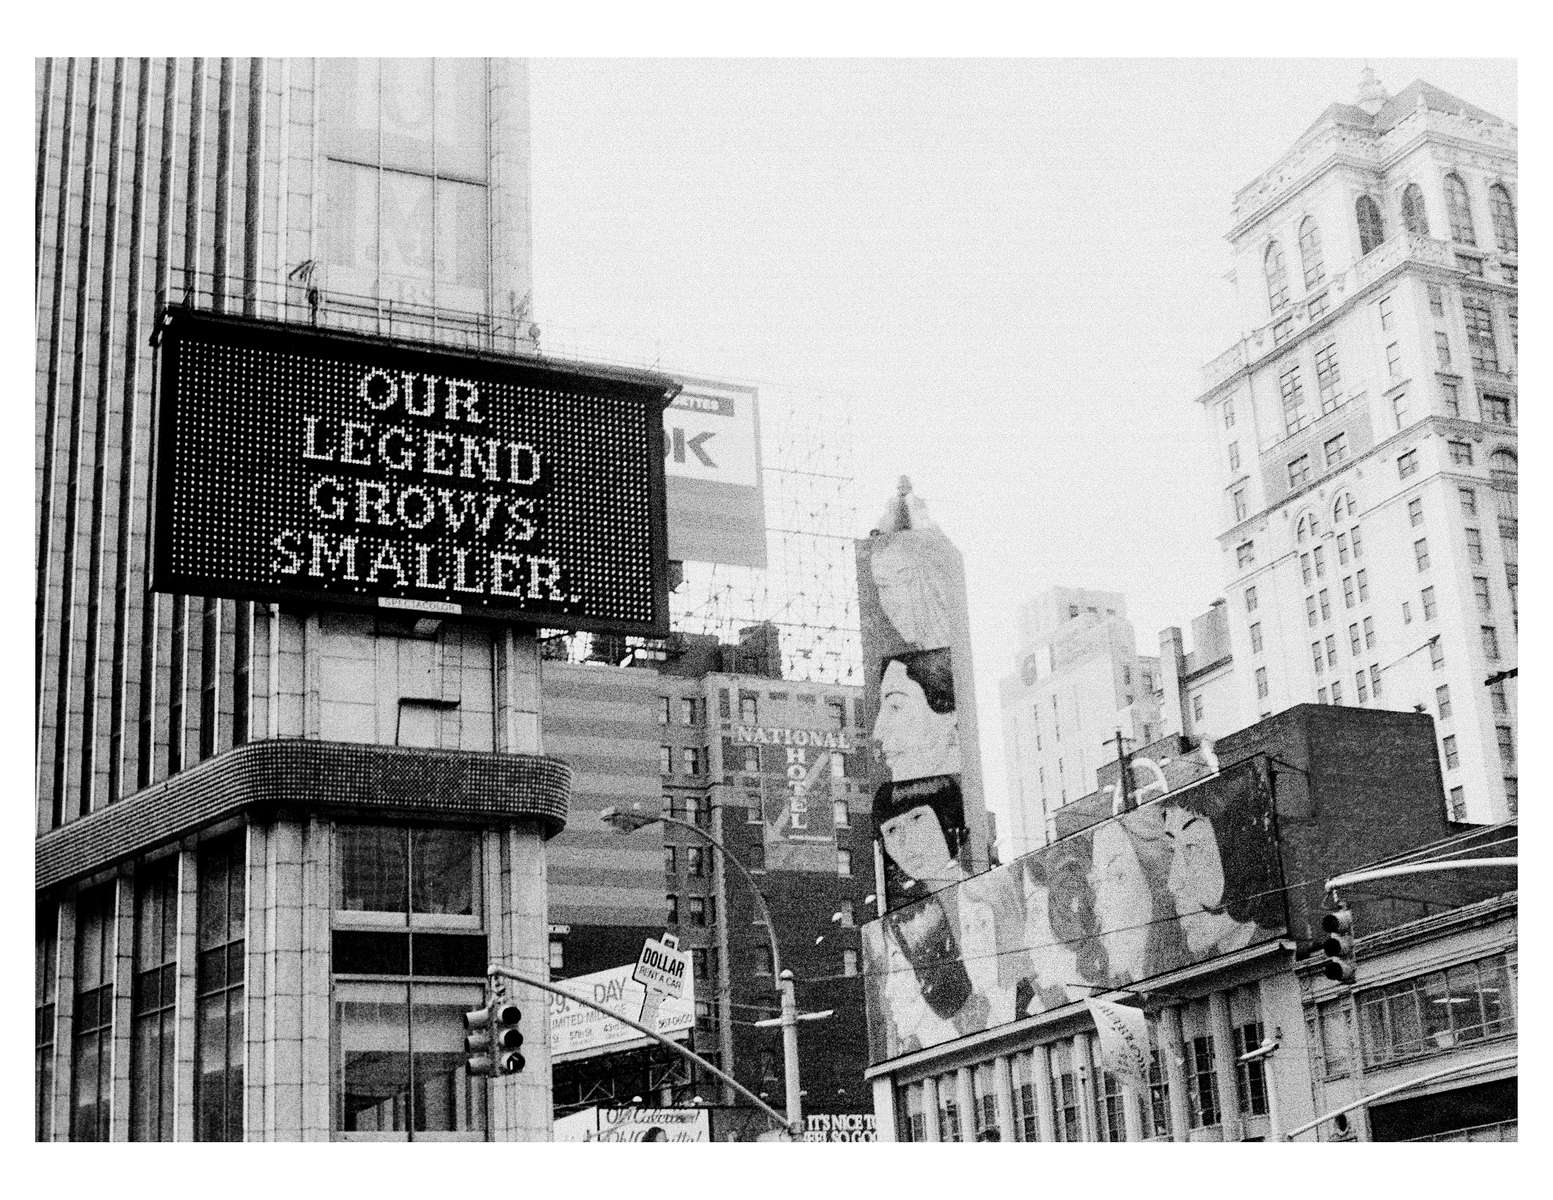 NYC-in-1979-our-legend-grows-_